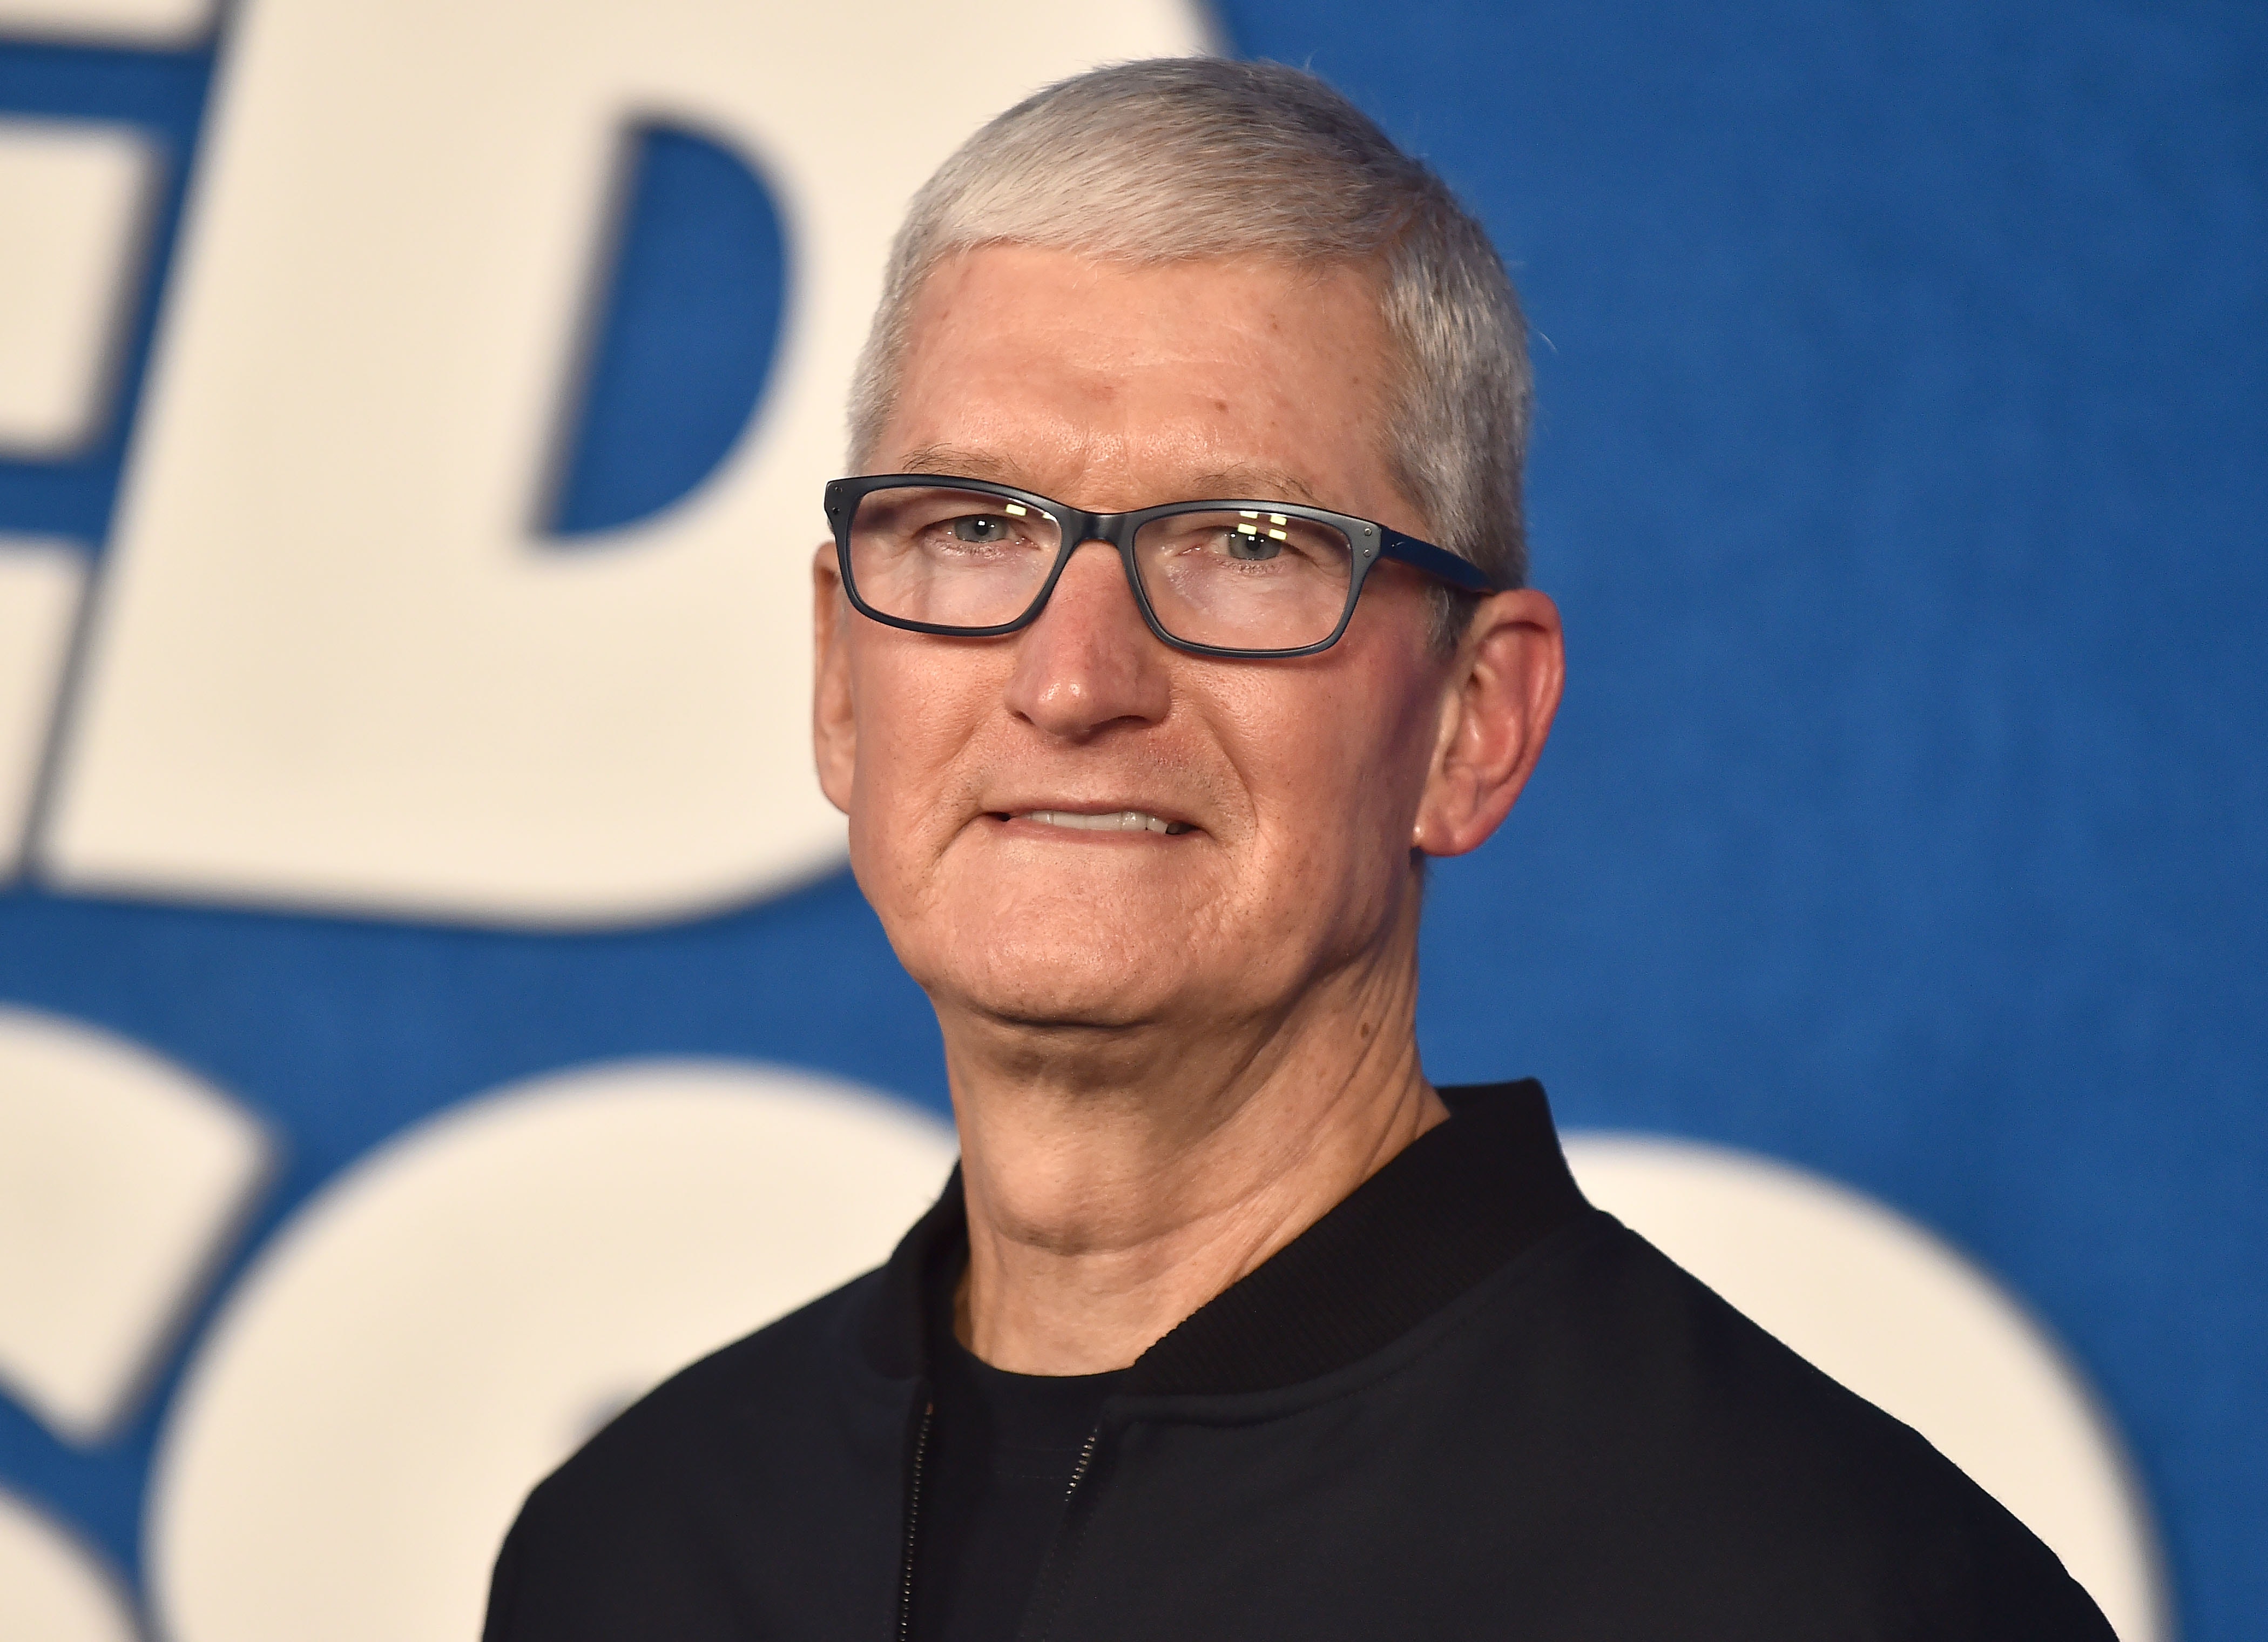 Apple Not The 'Market Leader' For Smartphones, Says CEO Tim Cook. 'Facts Don't Bear You Out'